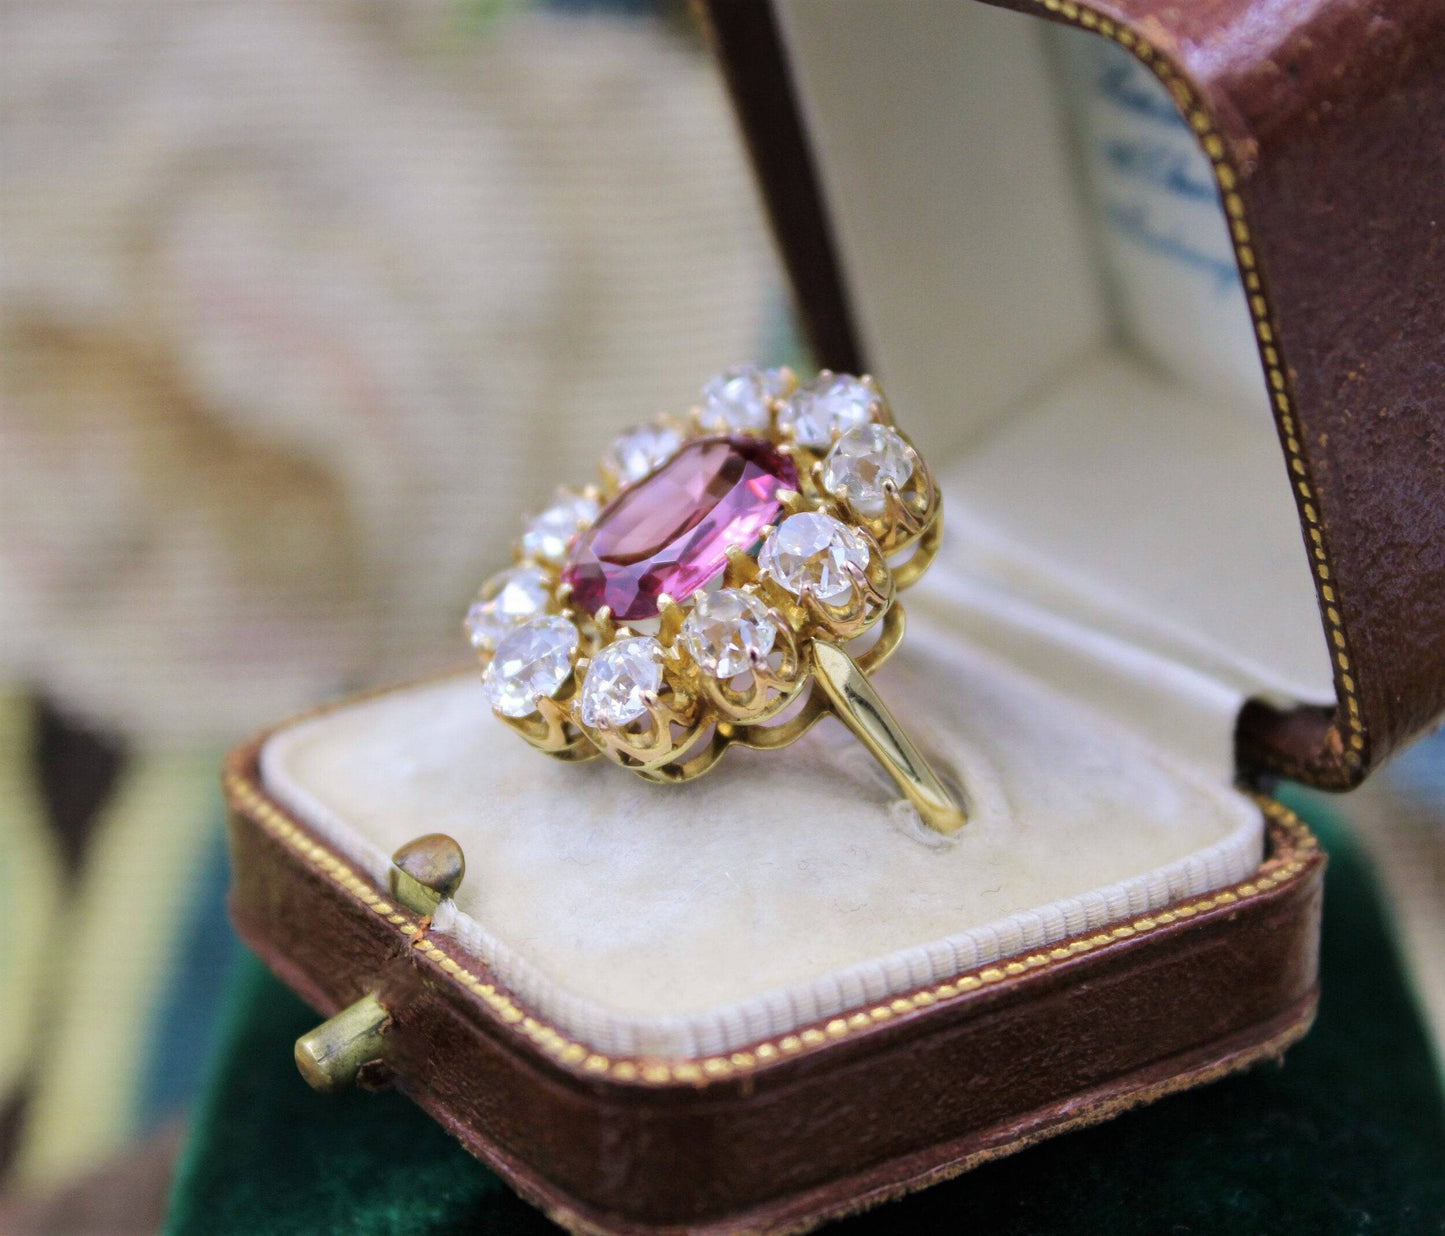 An extraordinary and rare 3.00 Carat Natural Pink Spinel & Diamond Cluster Ring set in 18 Carat Yellow Gold, English, Circa 1900 - Robin Haydock Antiques